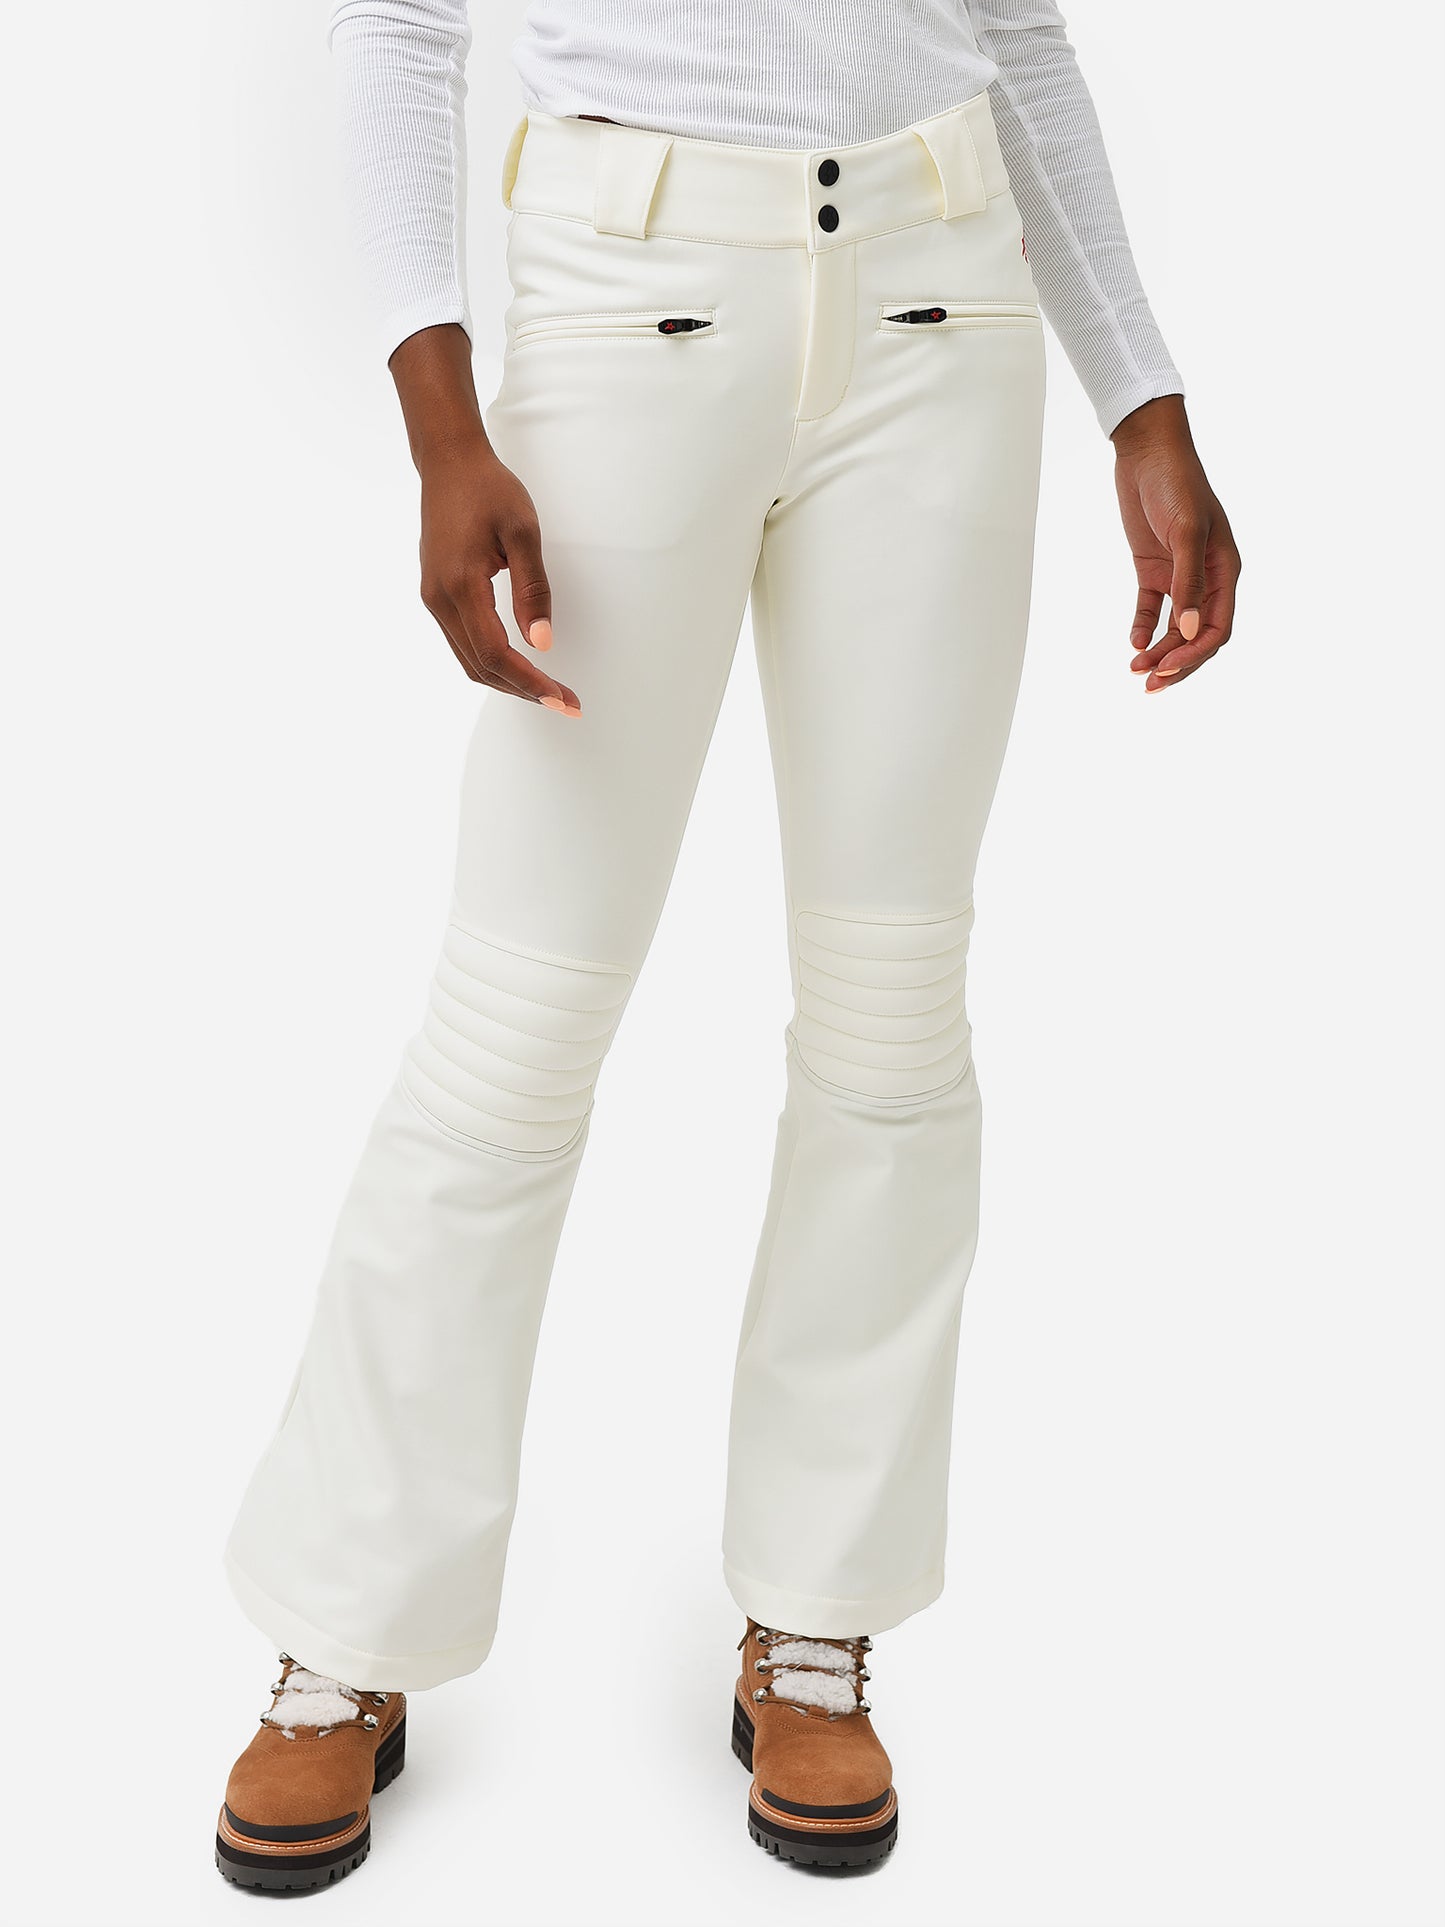 Perfect Moment Women's Aurora Flare Pant